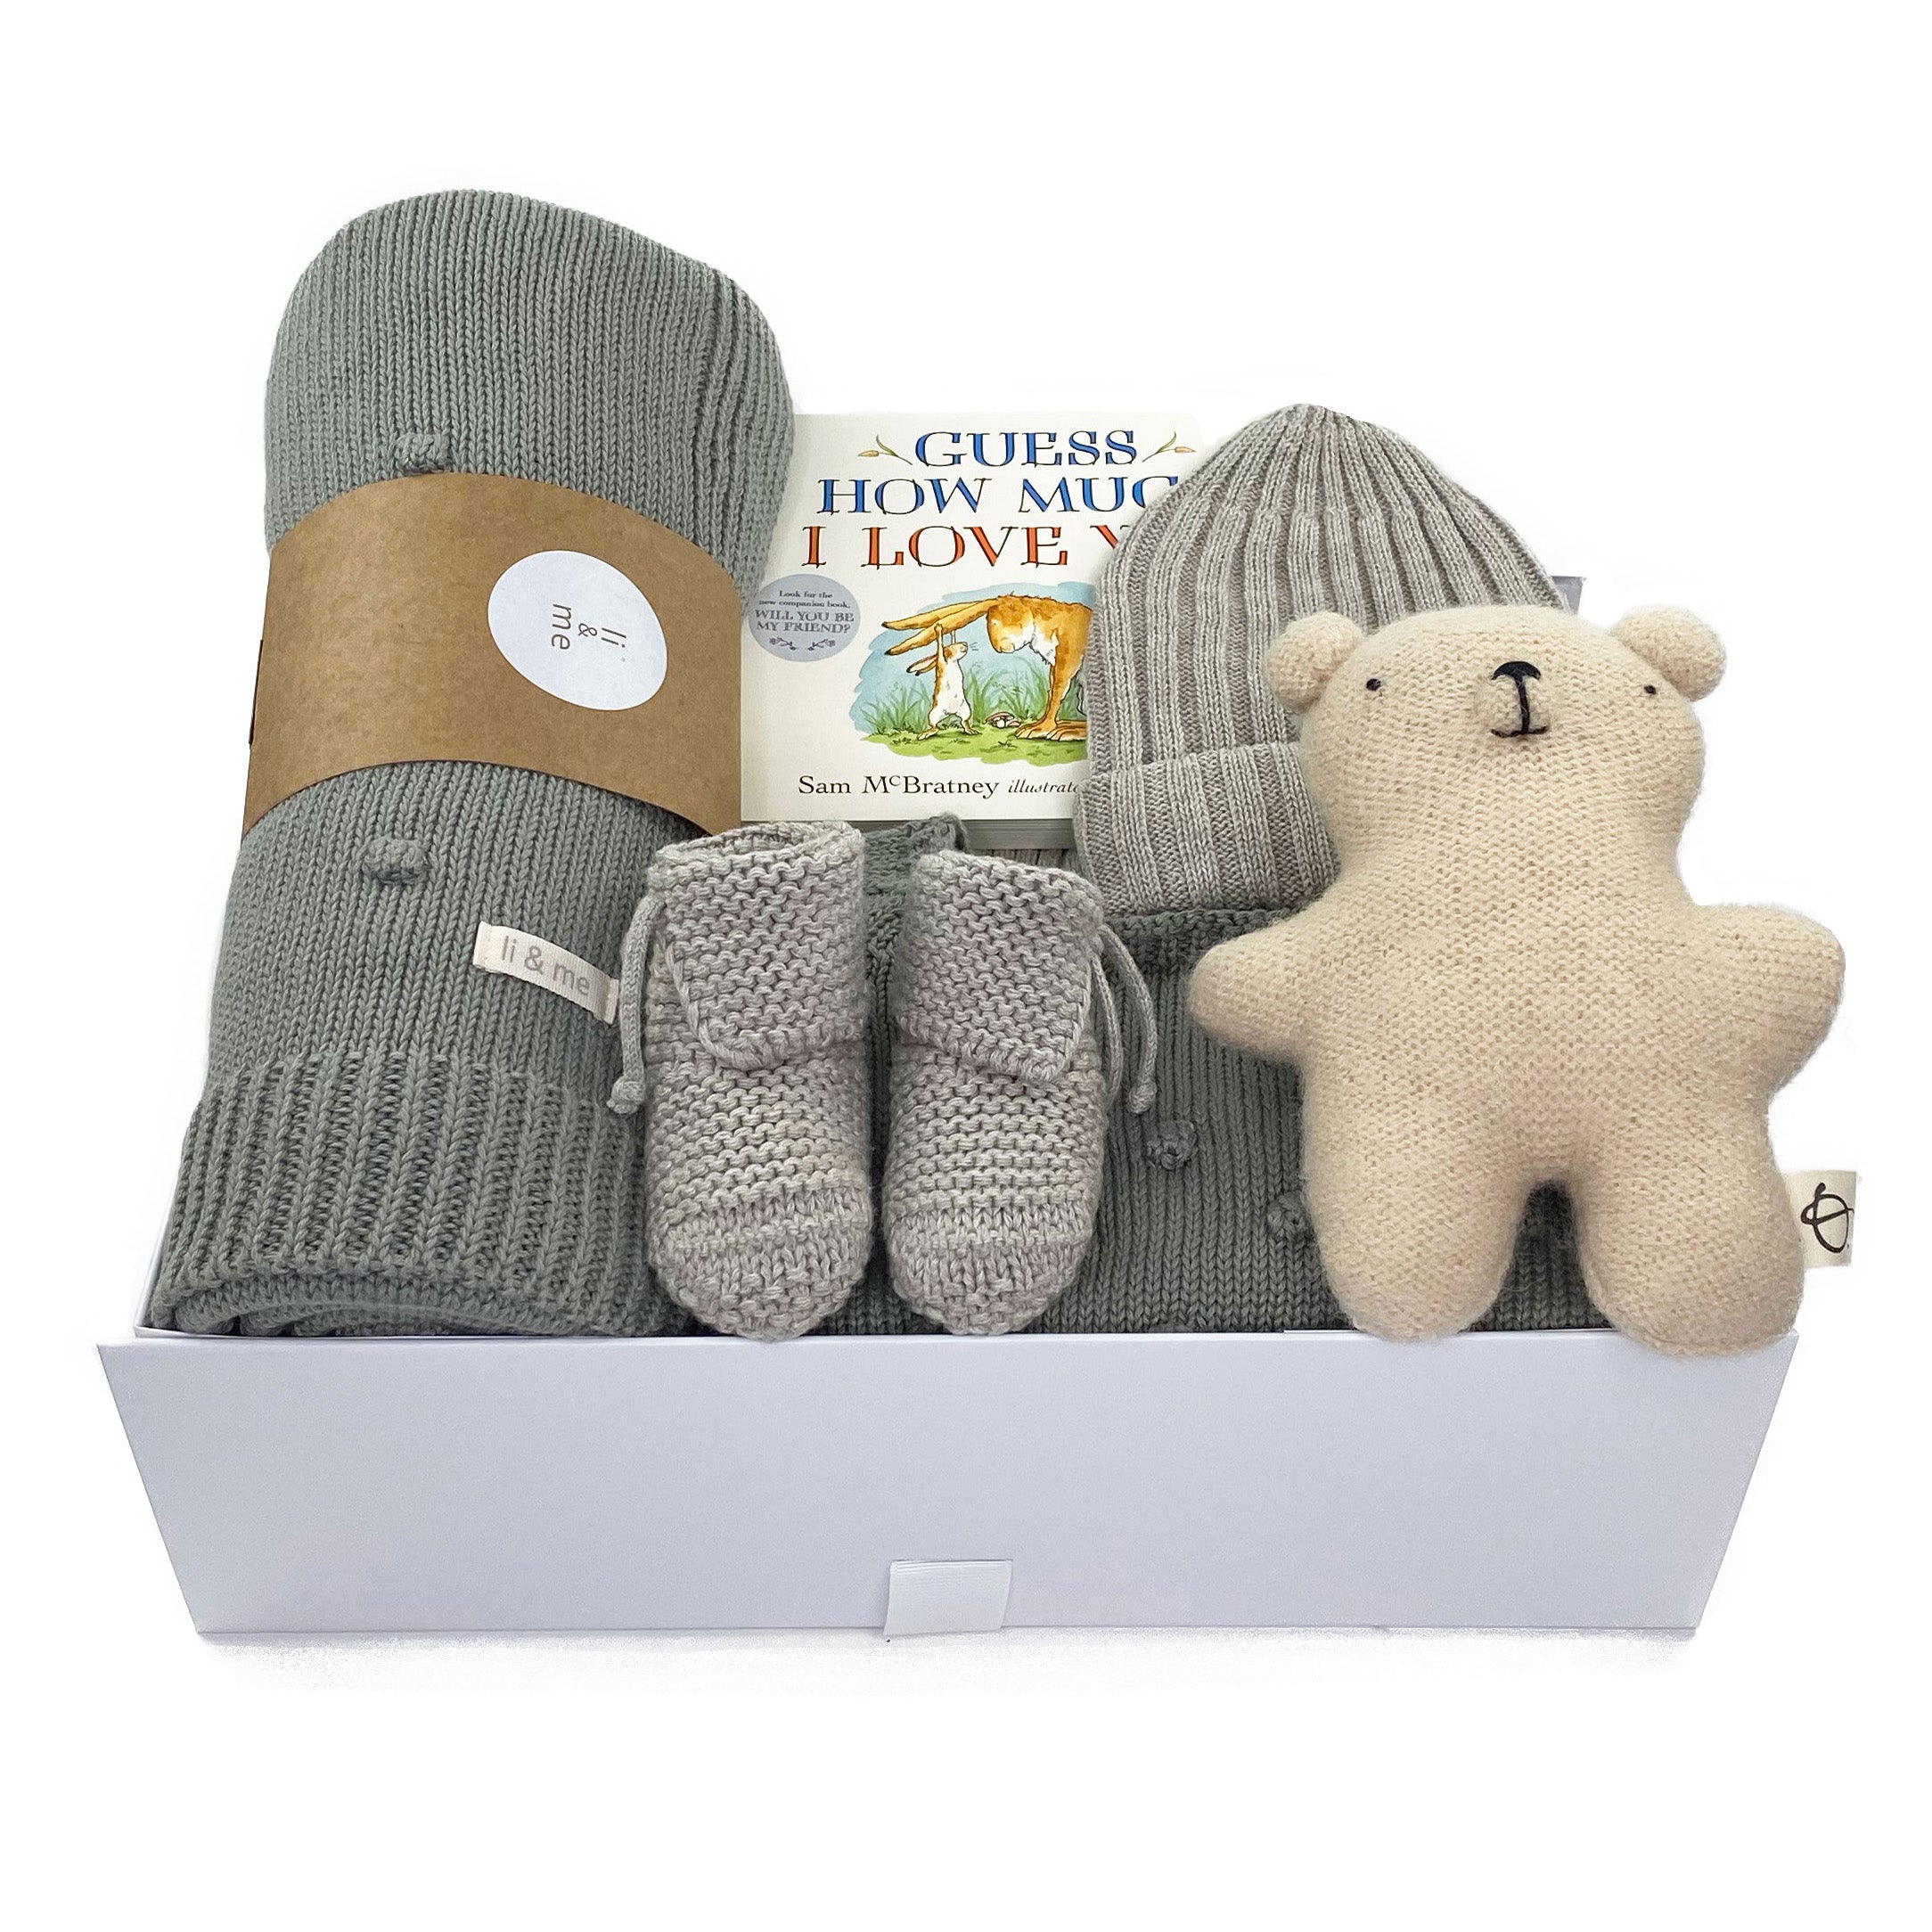 Luxury Baby Gift Box with cotton knitted clothing and the best baby gifts at Bonjour Baby Baskets